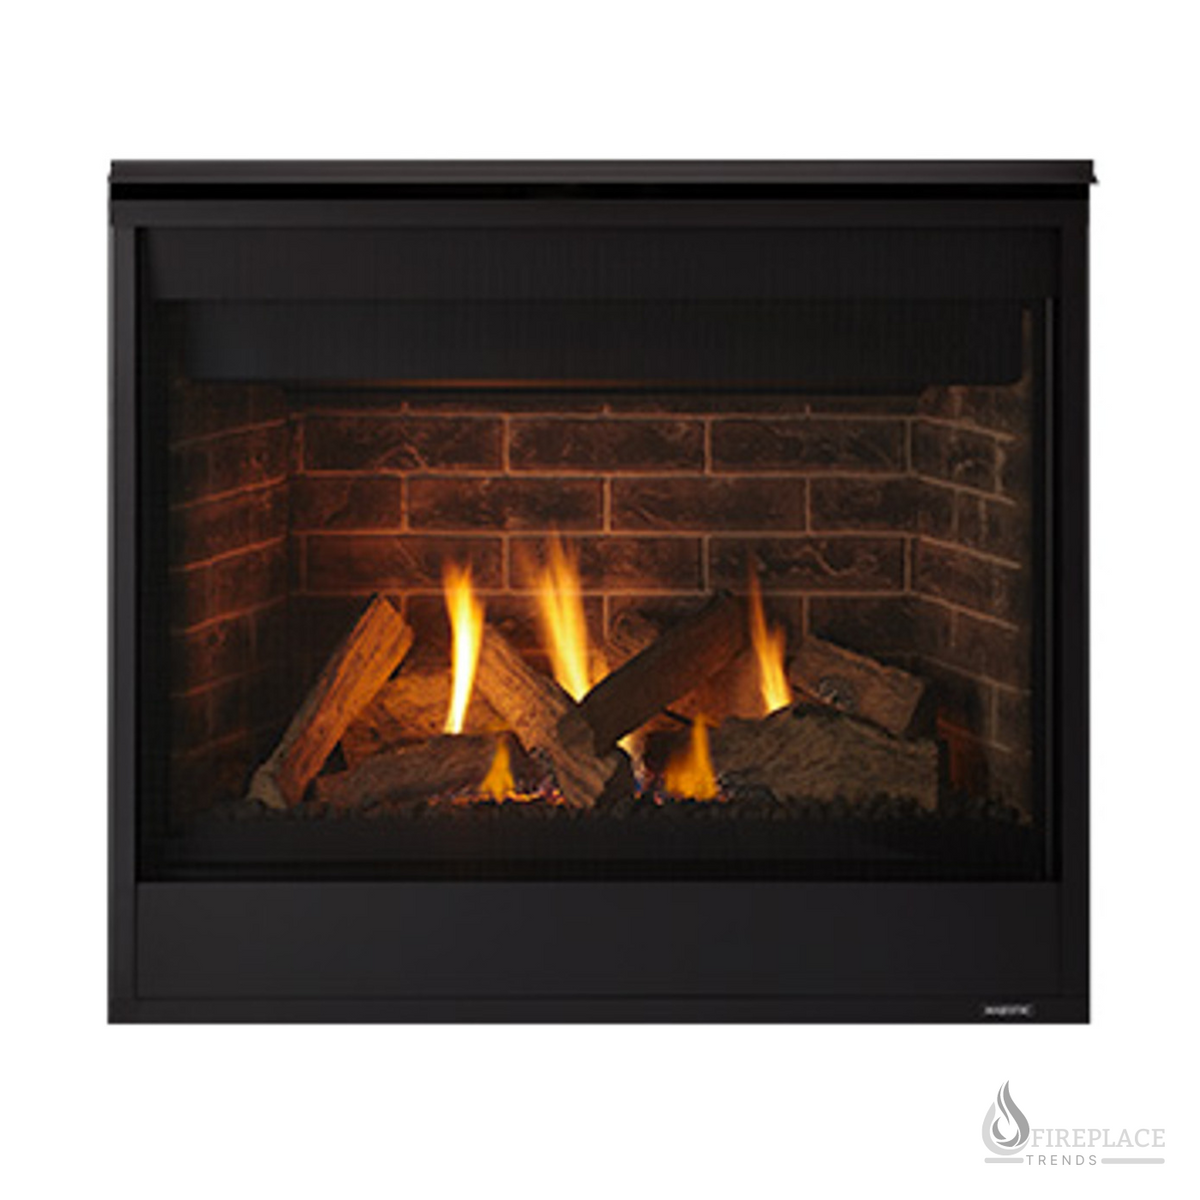 Majestic - Quartz 36" Direct Vent Traditional Gas Fireplace with IntelliFire Touch ignition